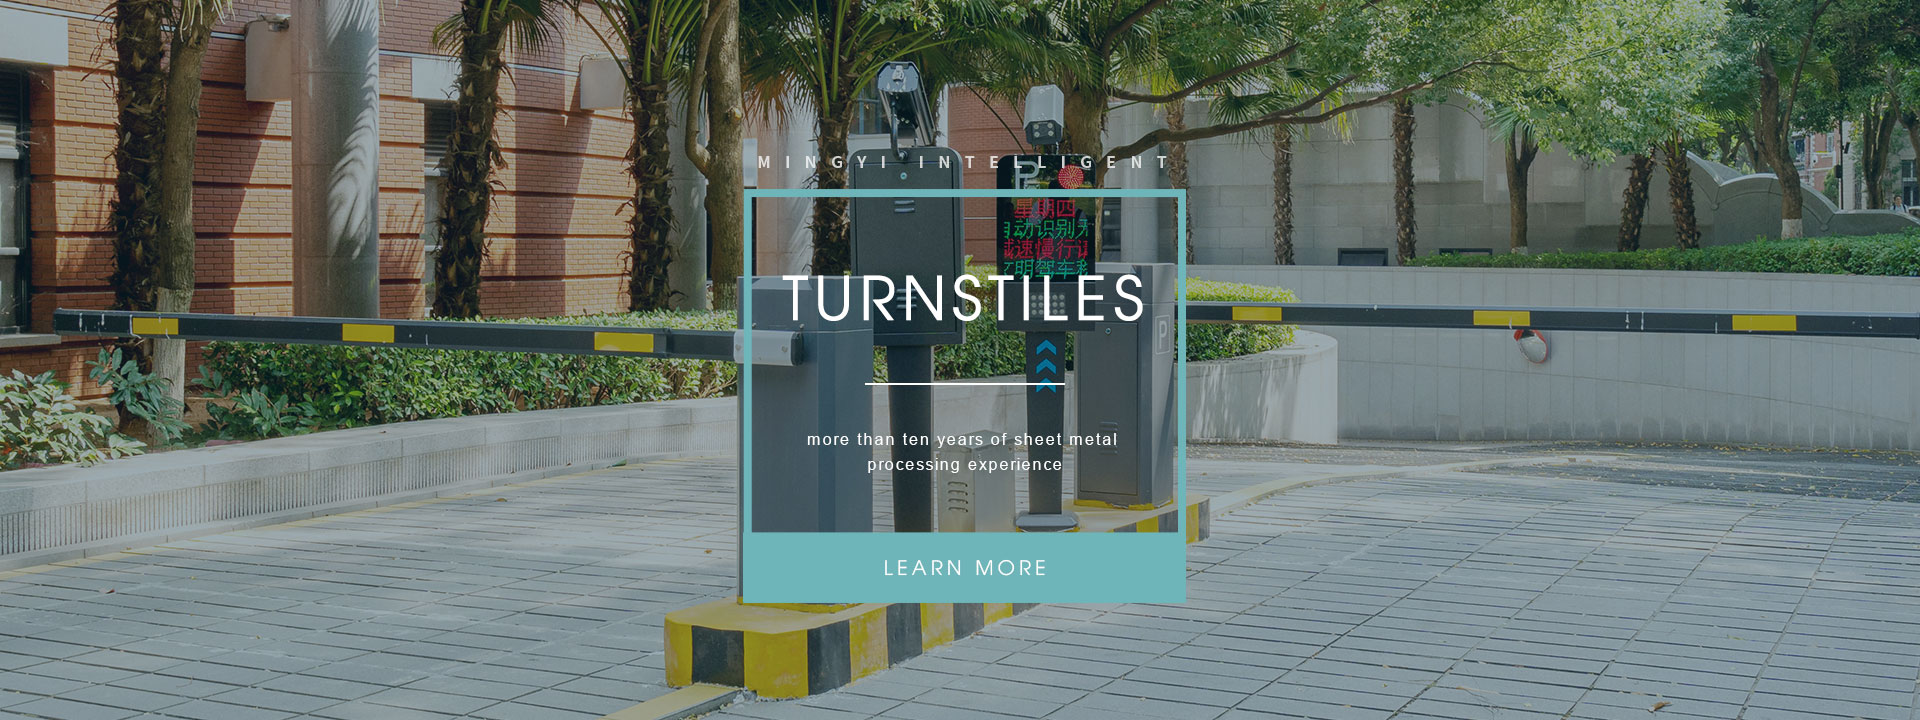 Turnstiles Manufacturers and Suppliers